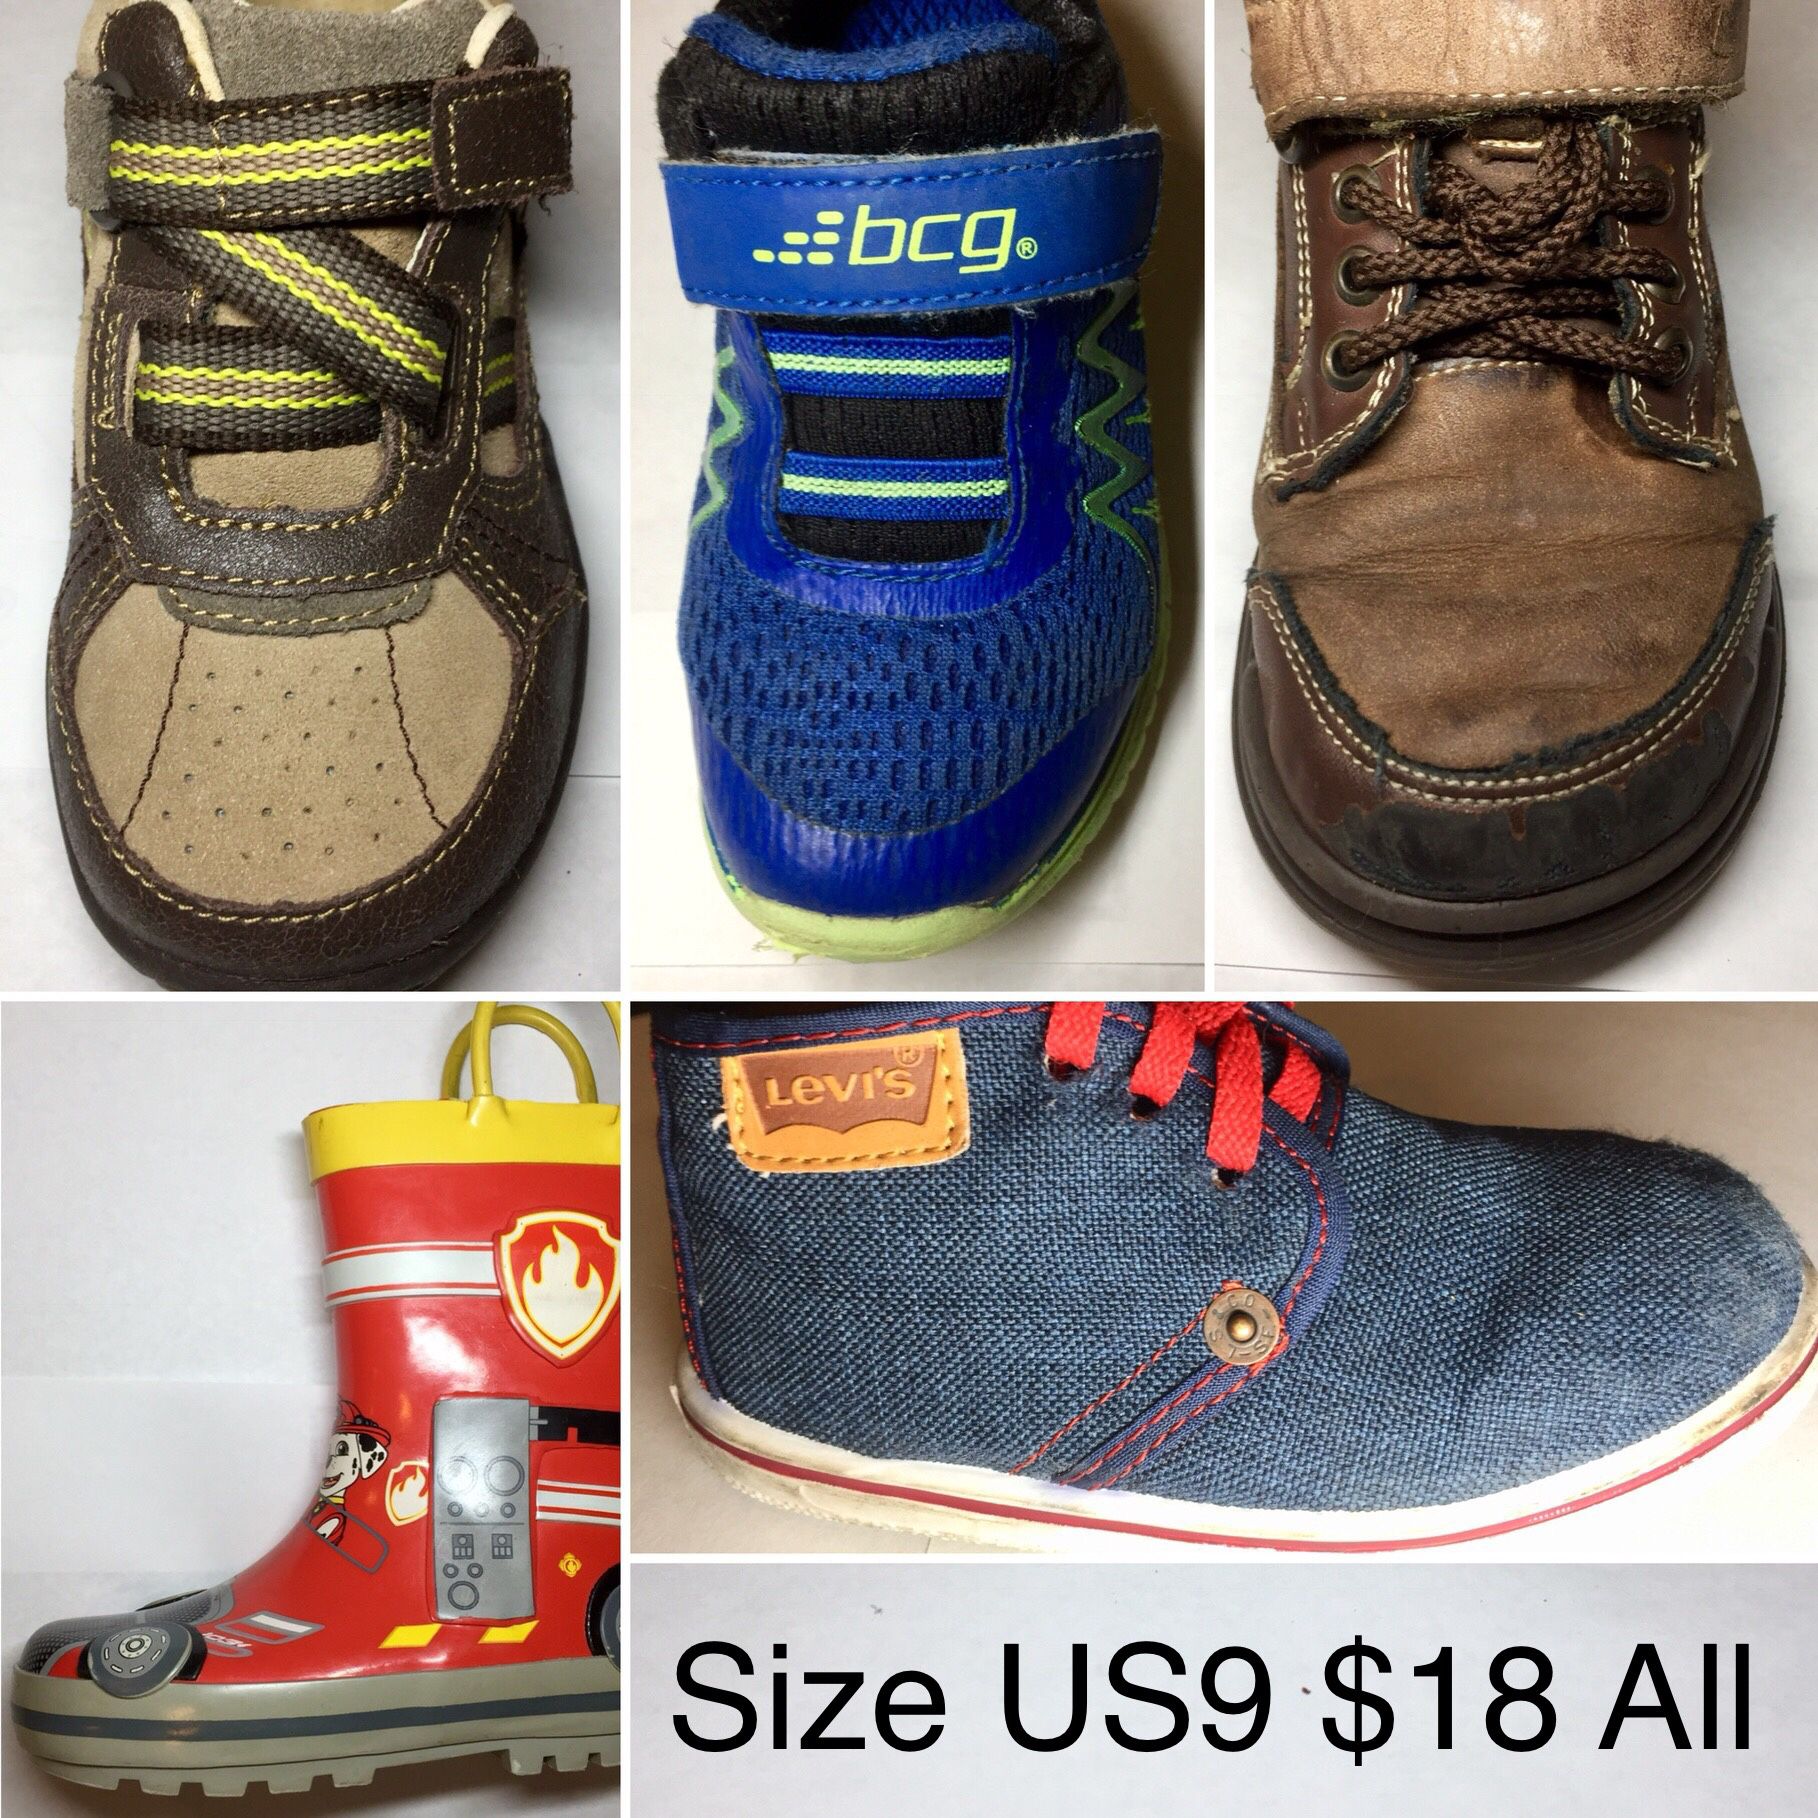 5 Pairs Boy Shoes Size US9. All for $18